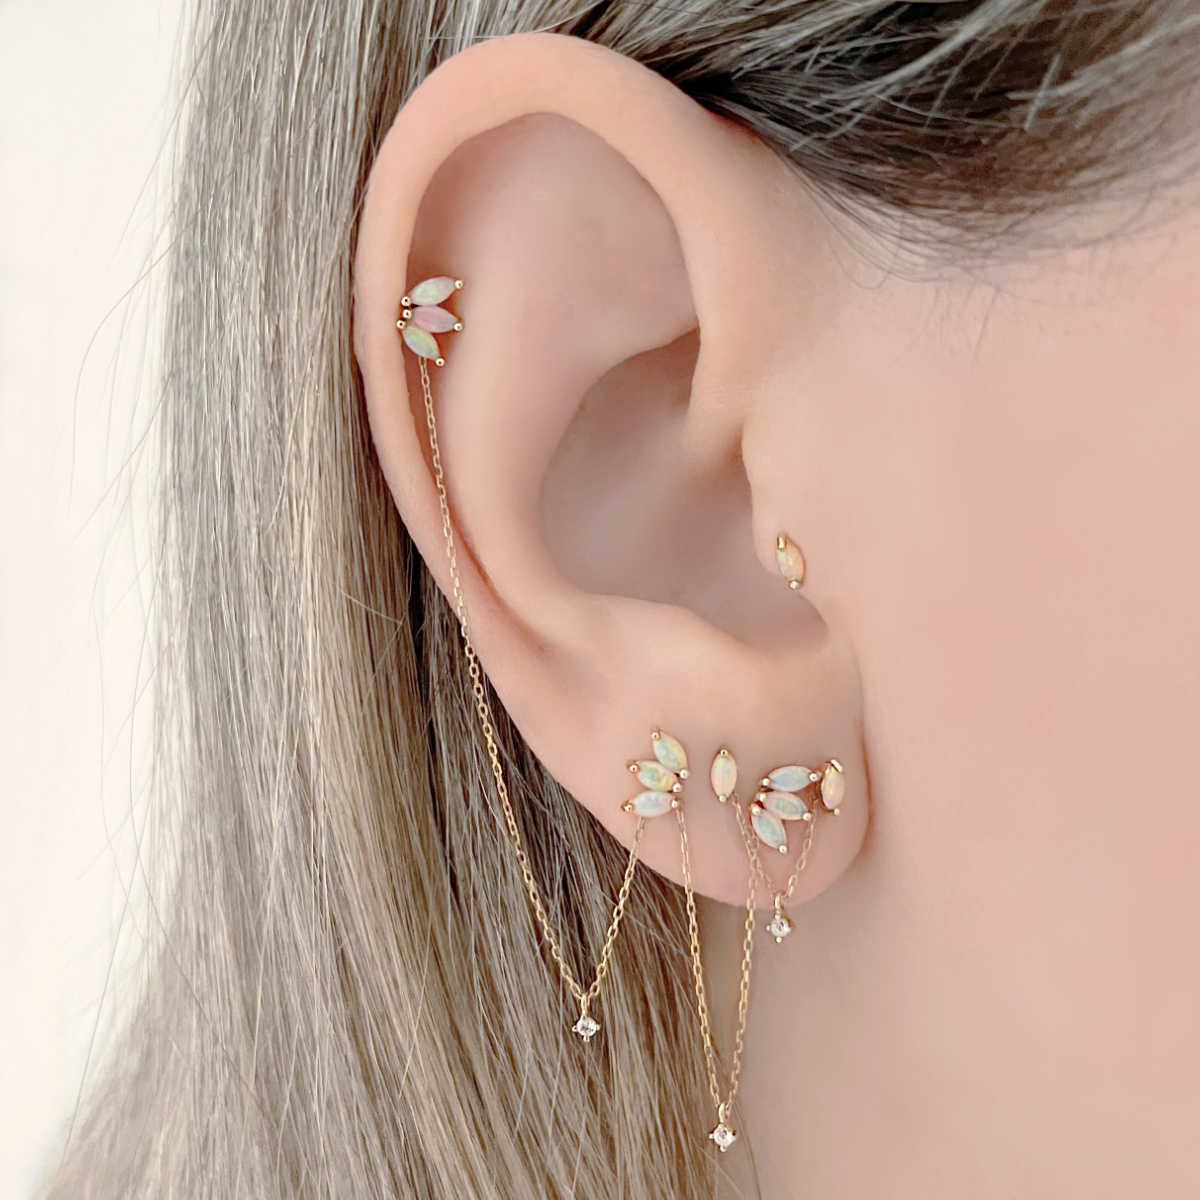 Dangling Diamond Earring Charms, Stud Connector Chains from Two of Most